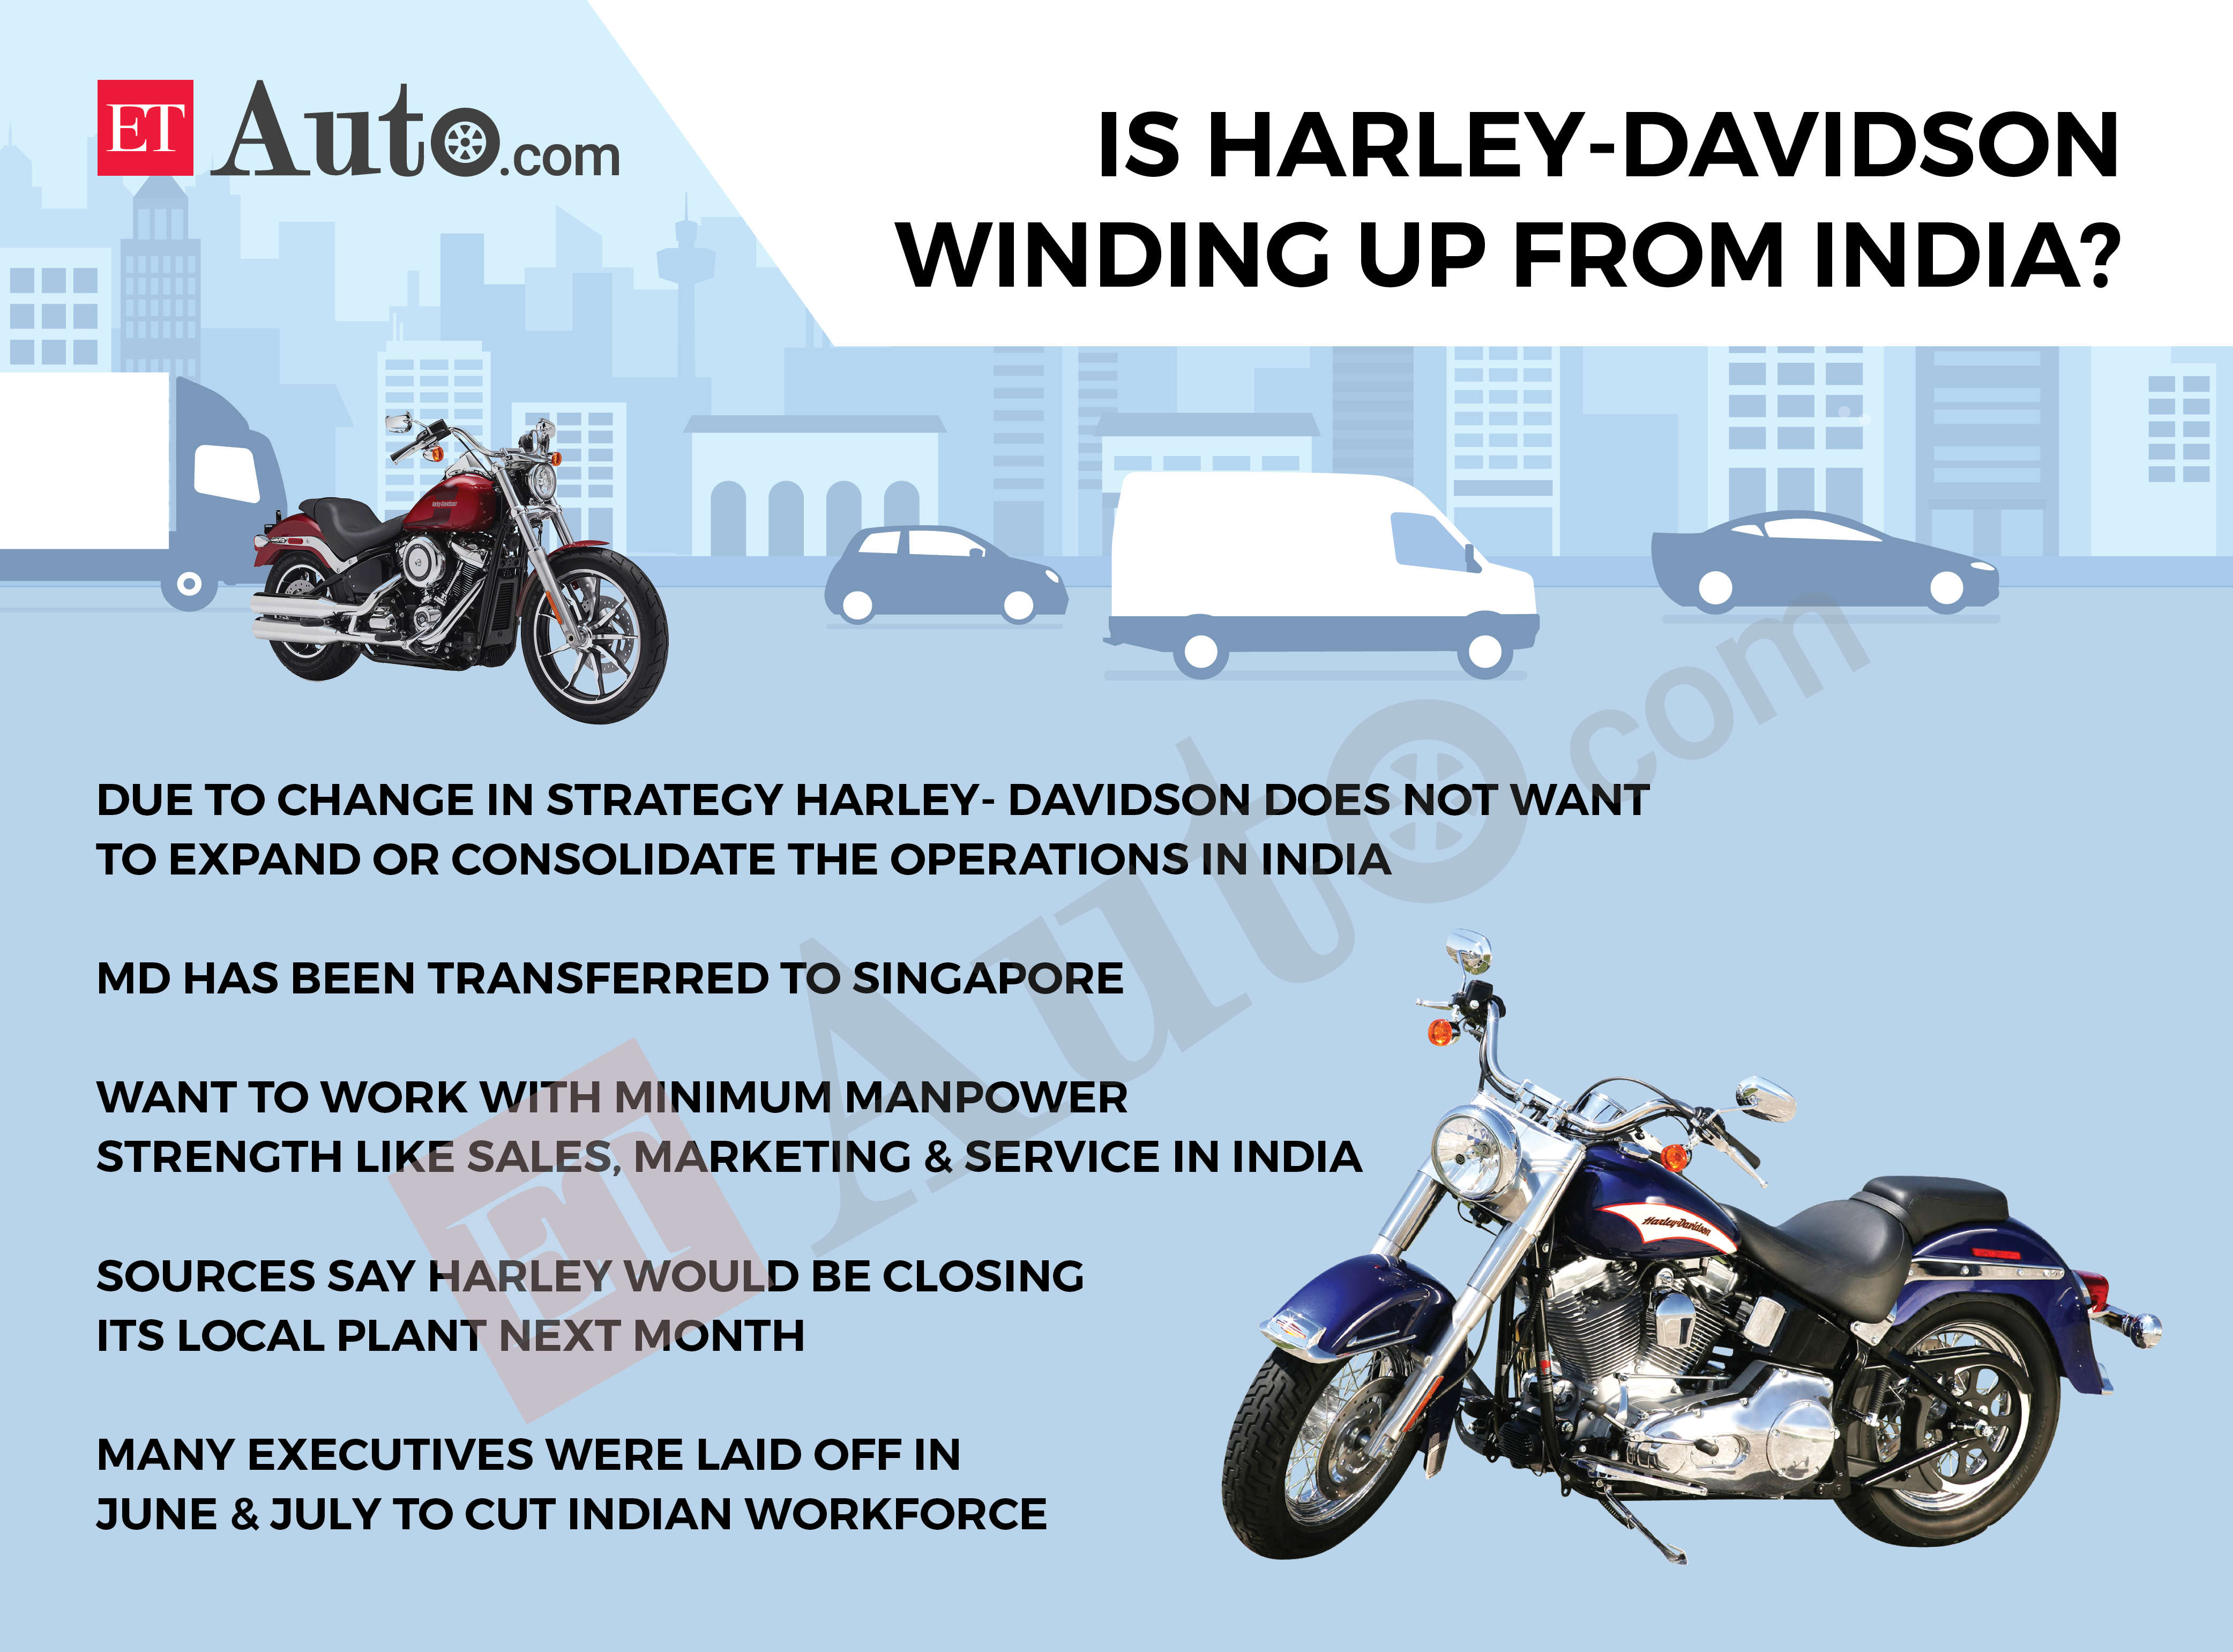 Harley Davidson Rewire Plan Etauto Originals Is American Motoring Dream Coming To A Complete End In India Auto News Et Auto